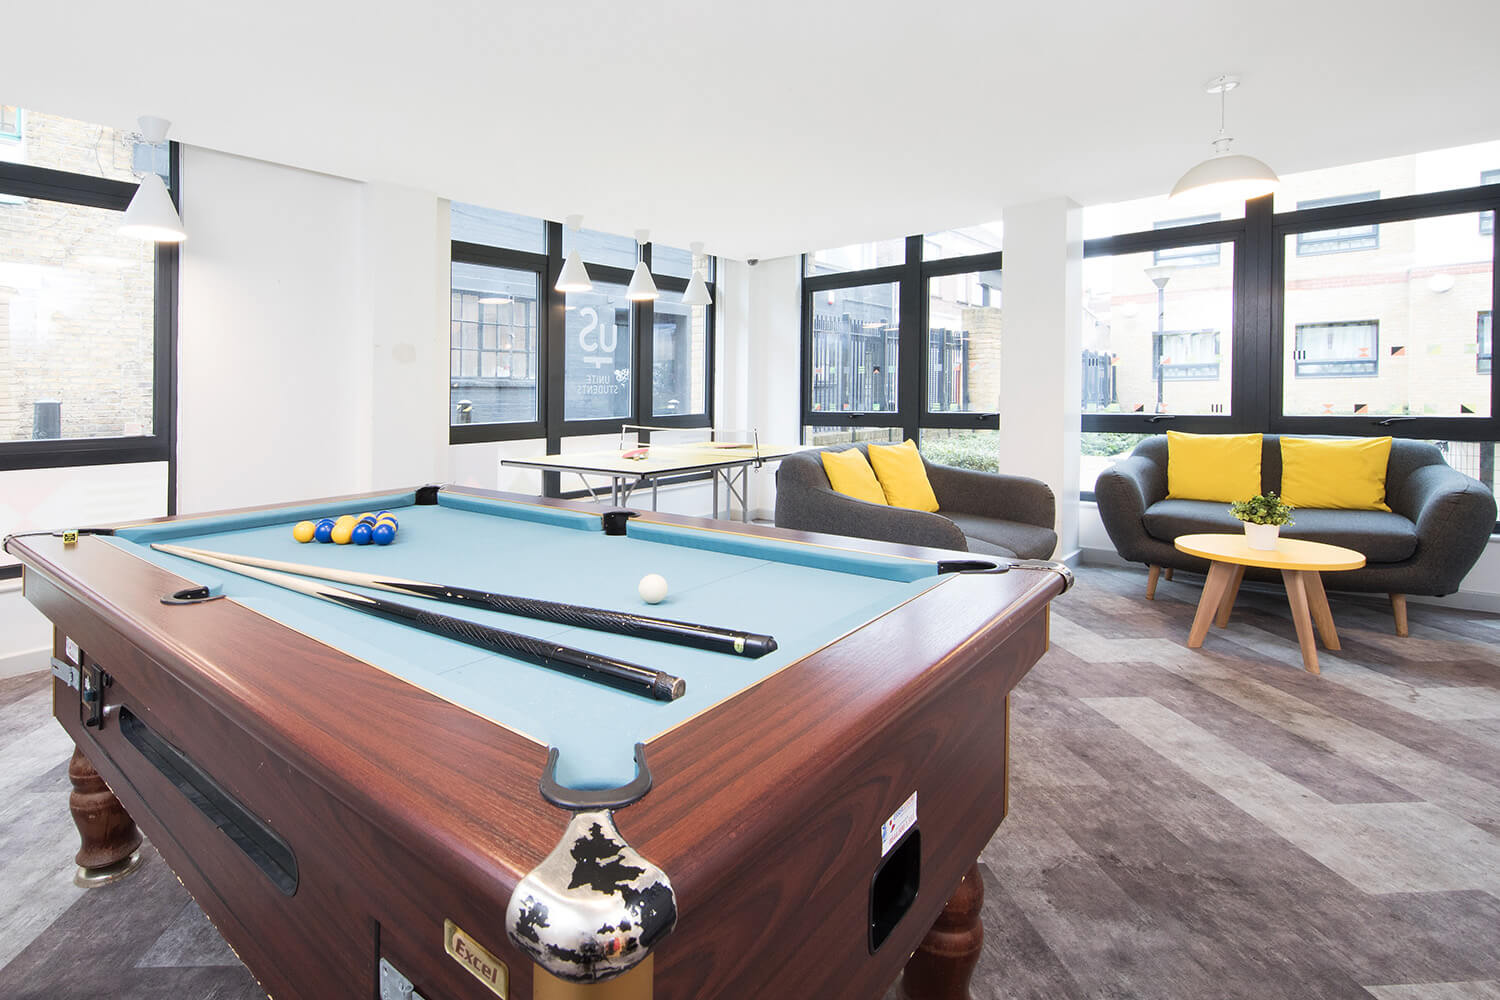 Student accommodation London pool table and sofas in common room at Pacific Court